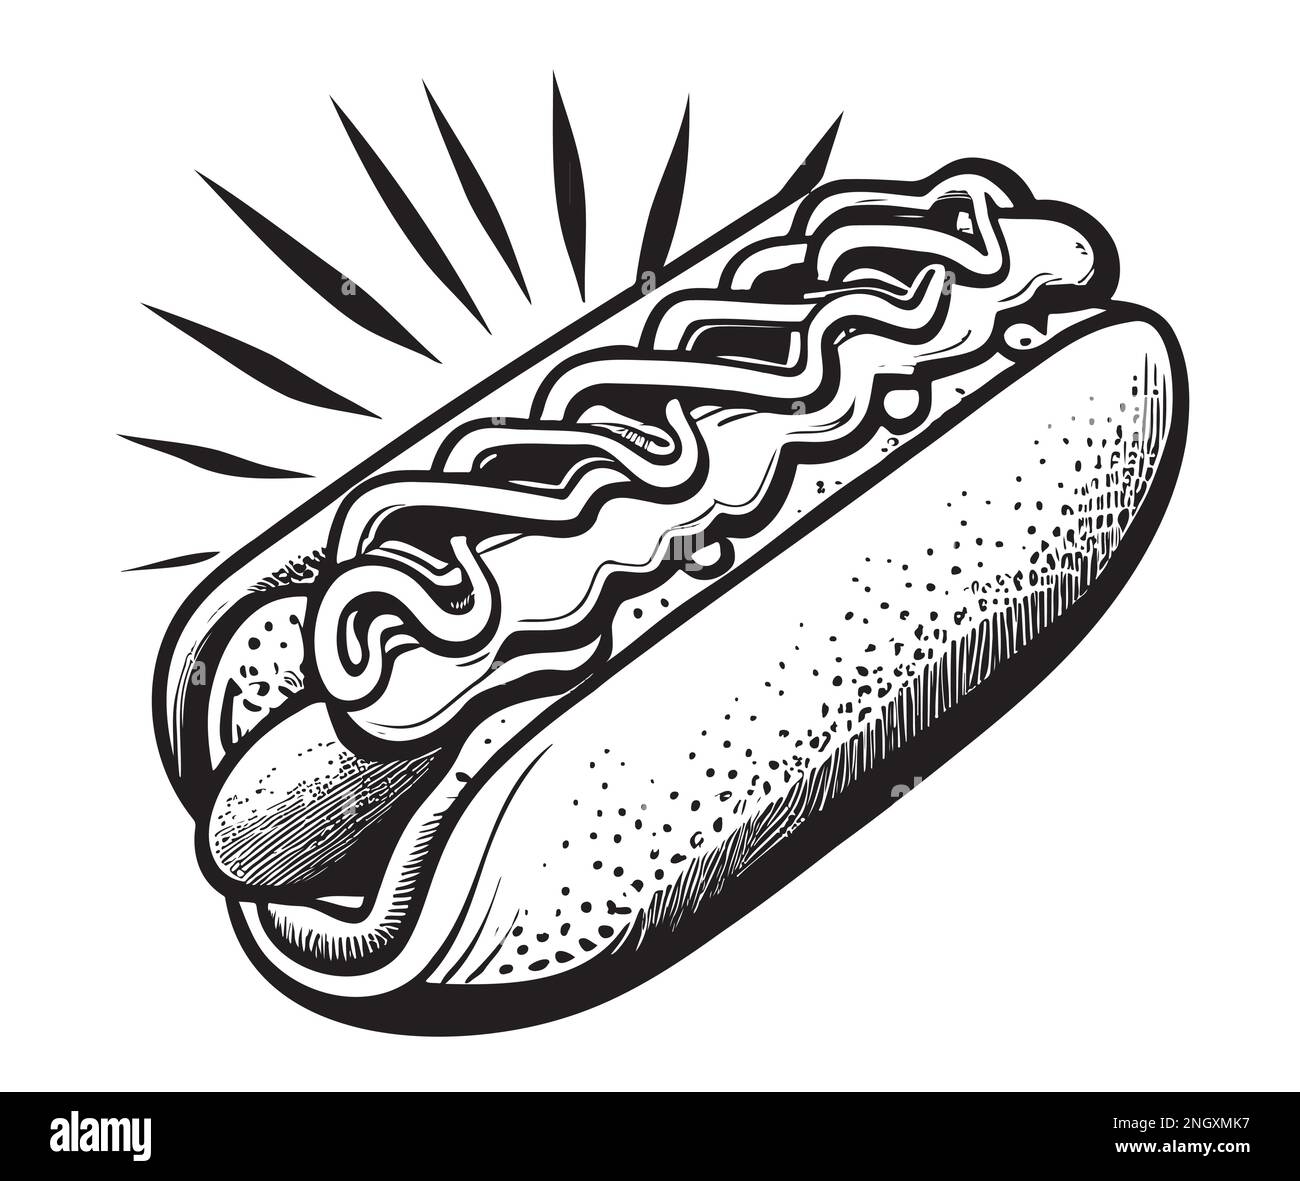 Hot dog fast food hand drawn sketch Vector illustration Meal Stock Vector